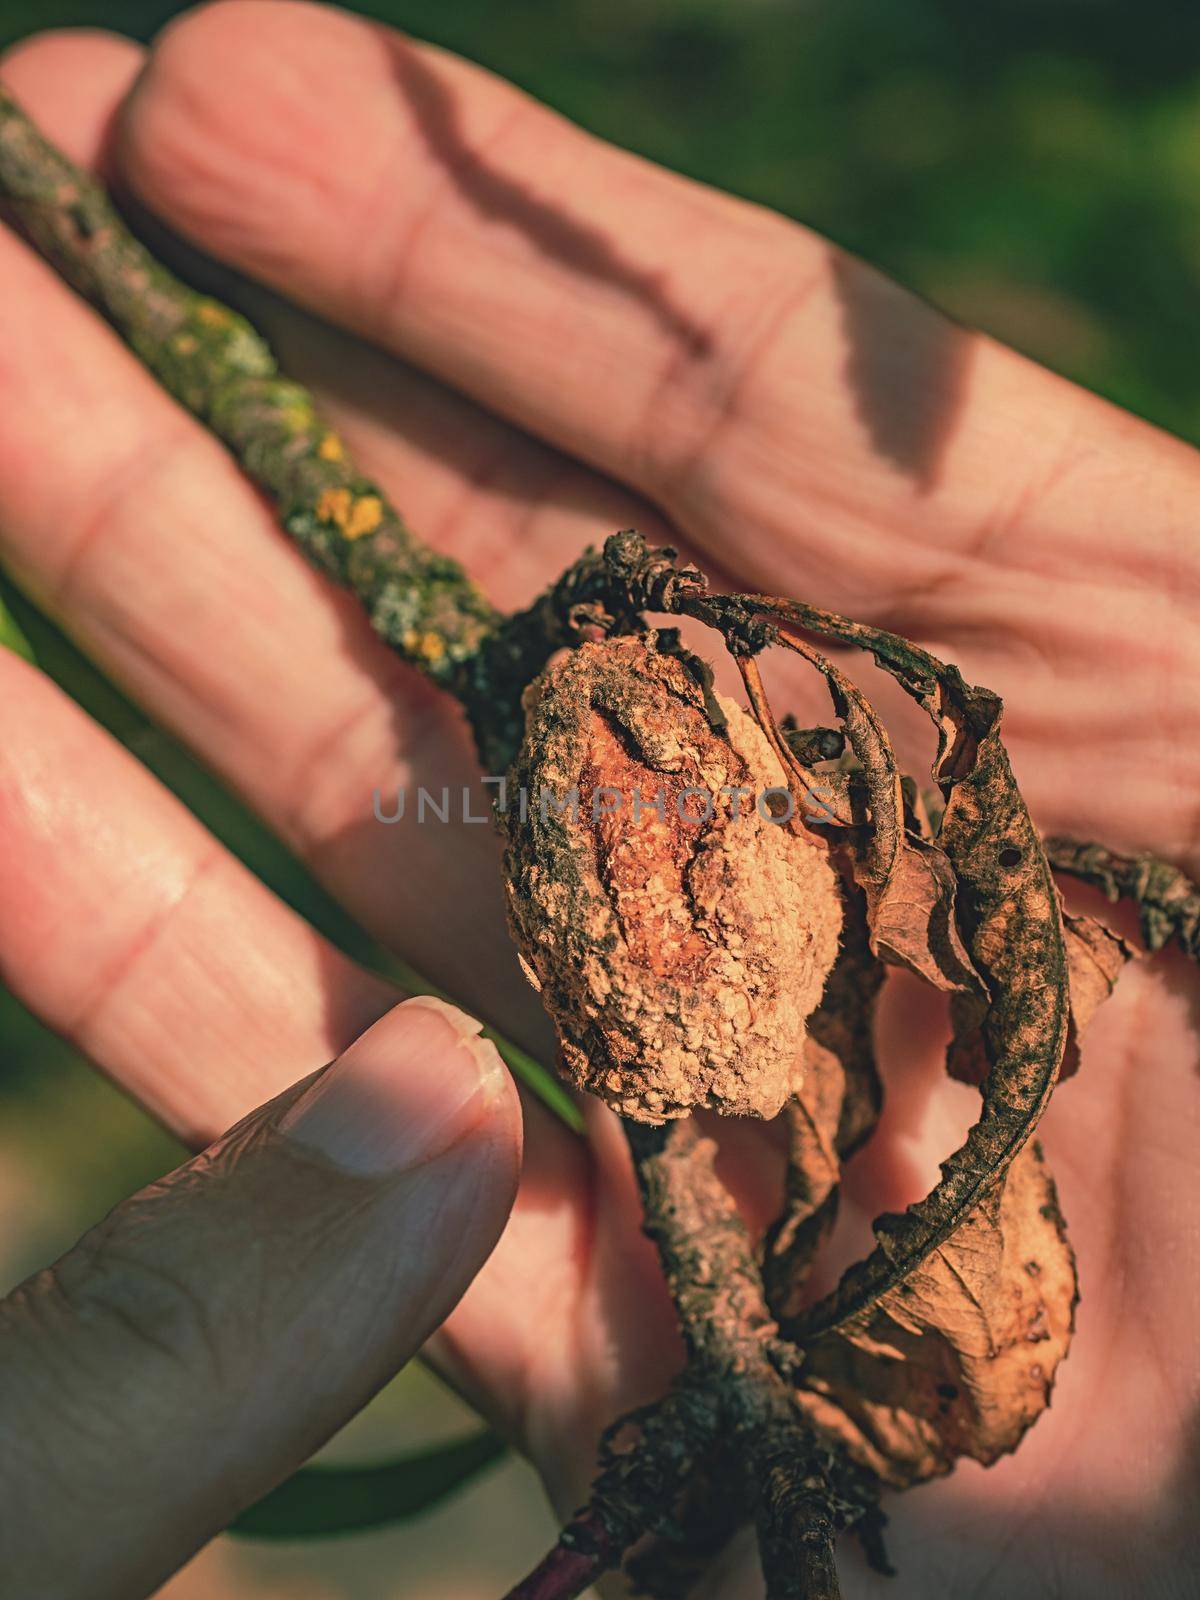 Farmer shows the rotten peach on a branch. Peach tree  diseases of fungi and mold.